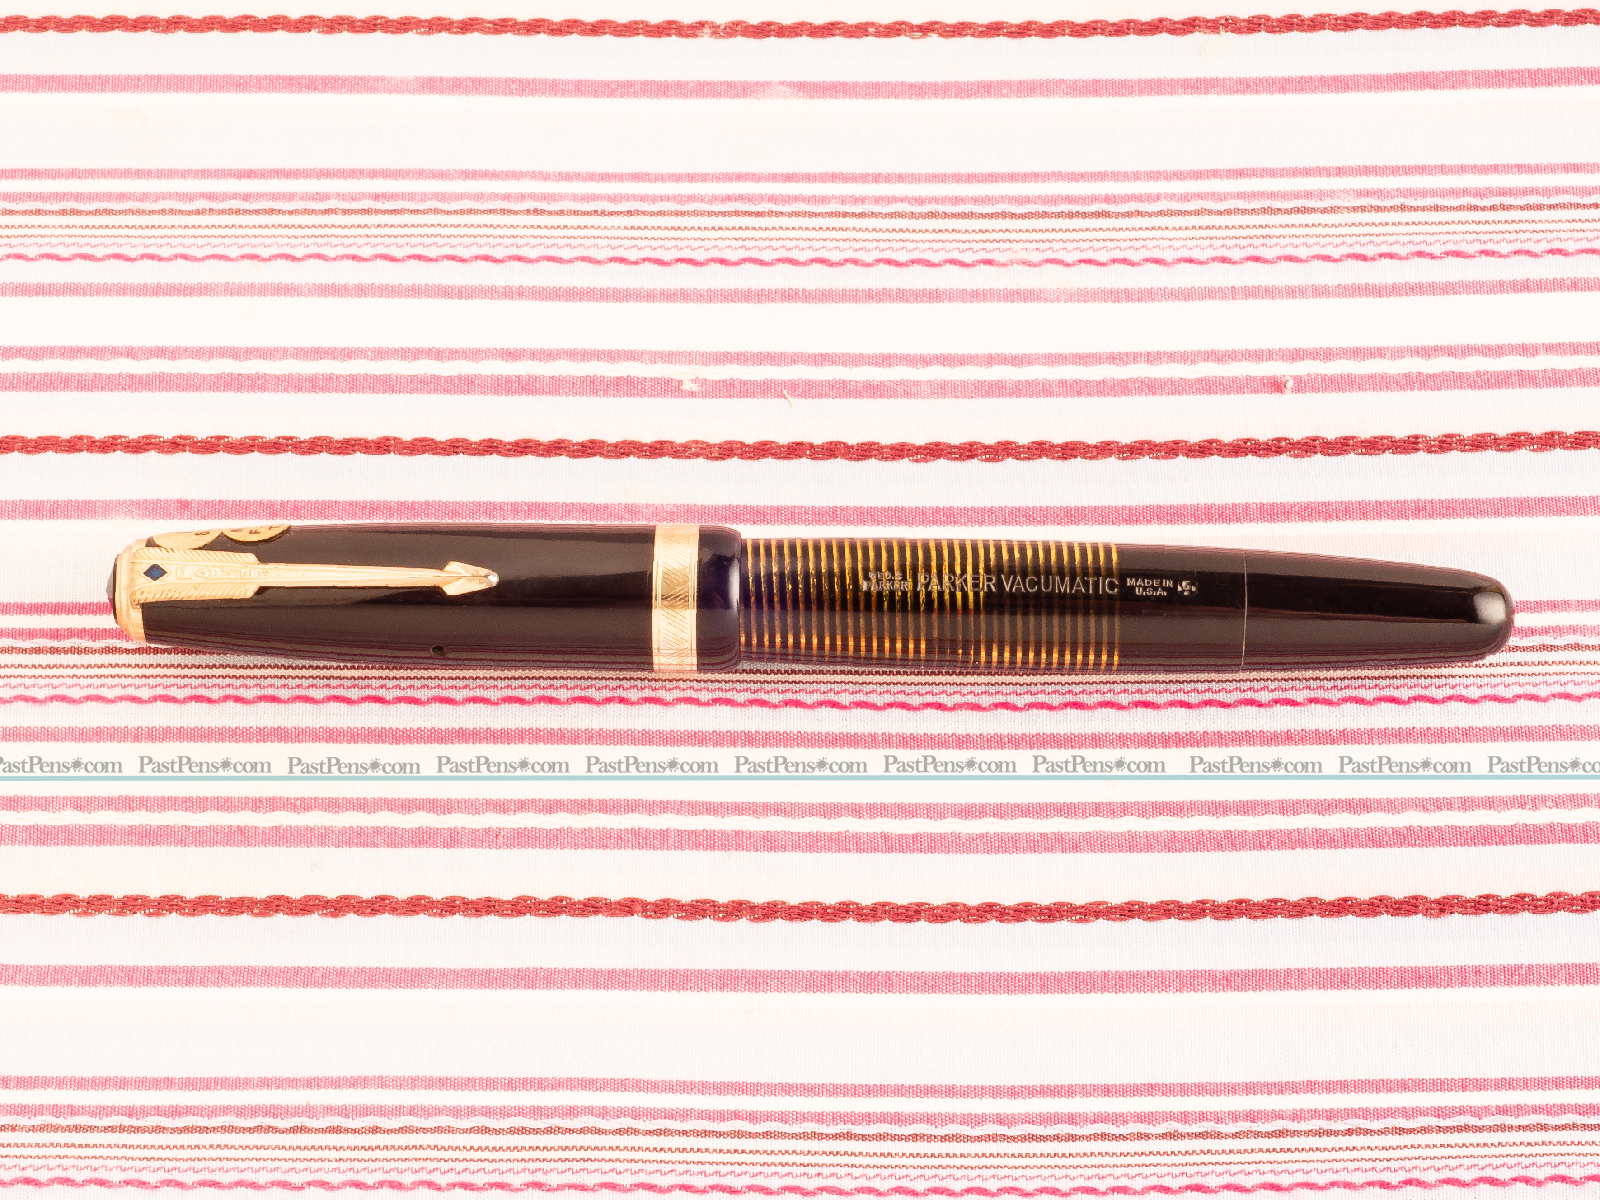 parker vacumatic black fountain pen new old stock pk282 collectibles